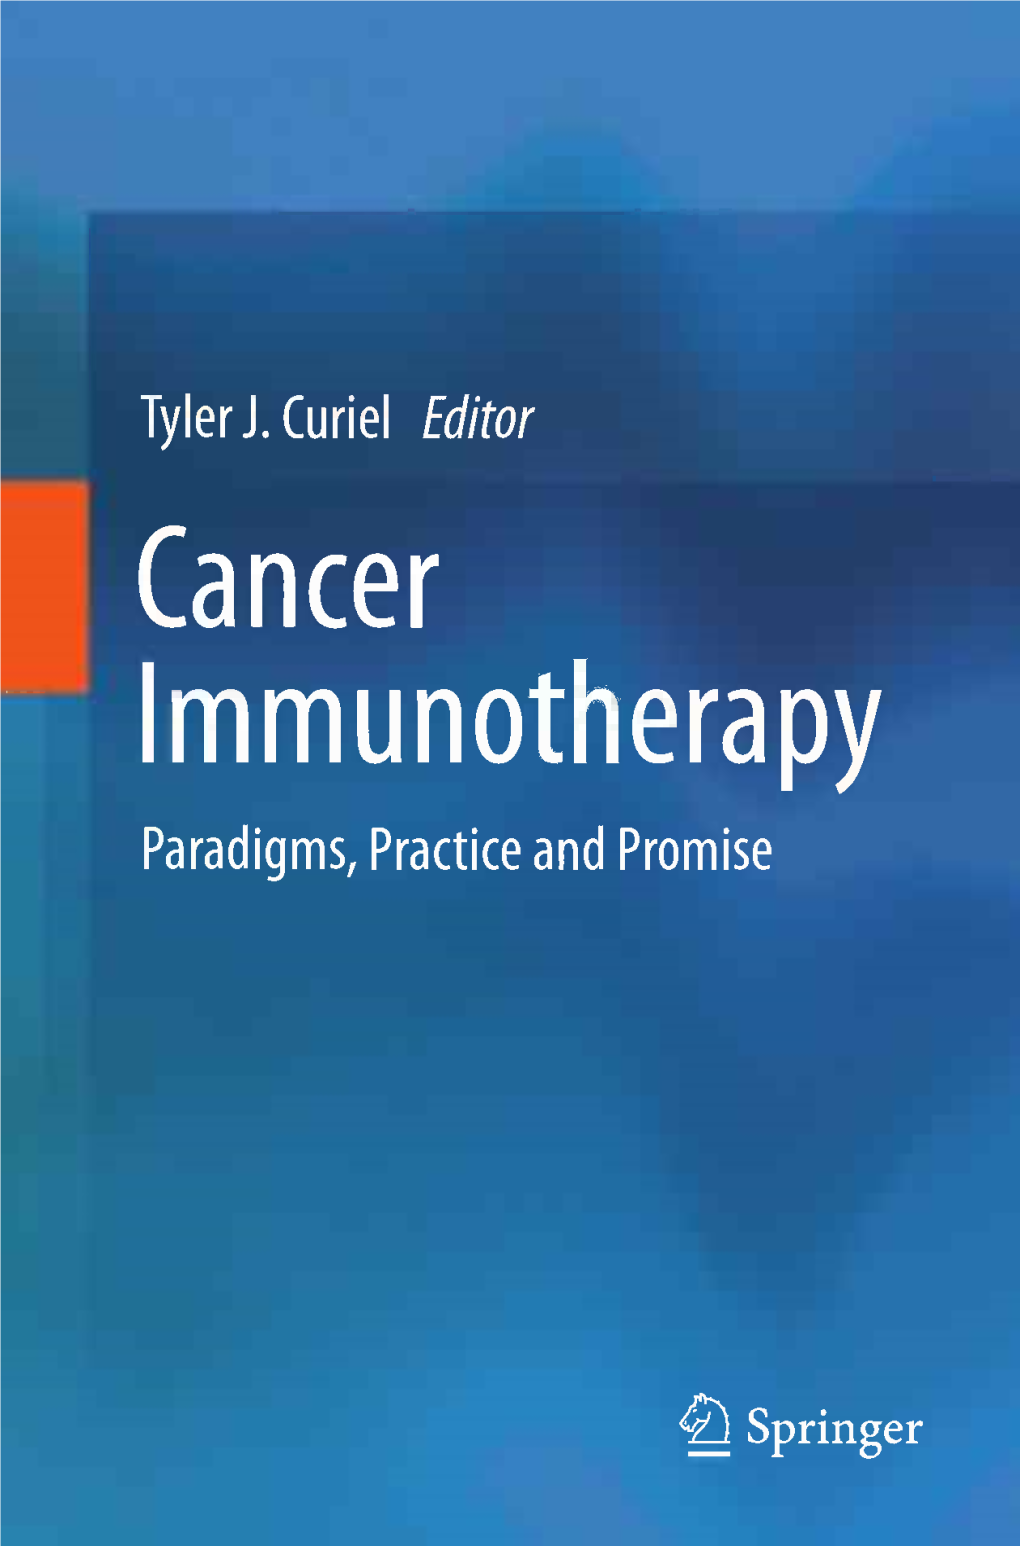 Cancer Immunotherapy.Pdf